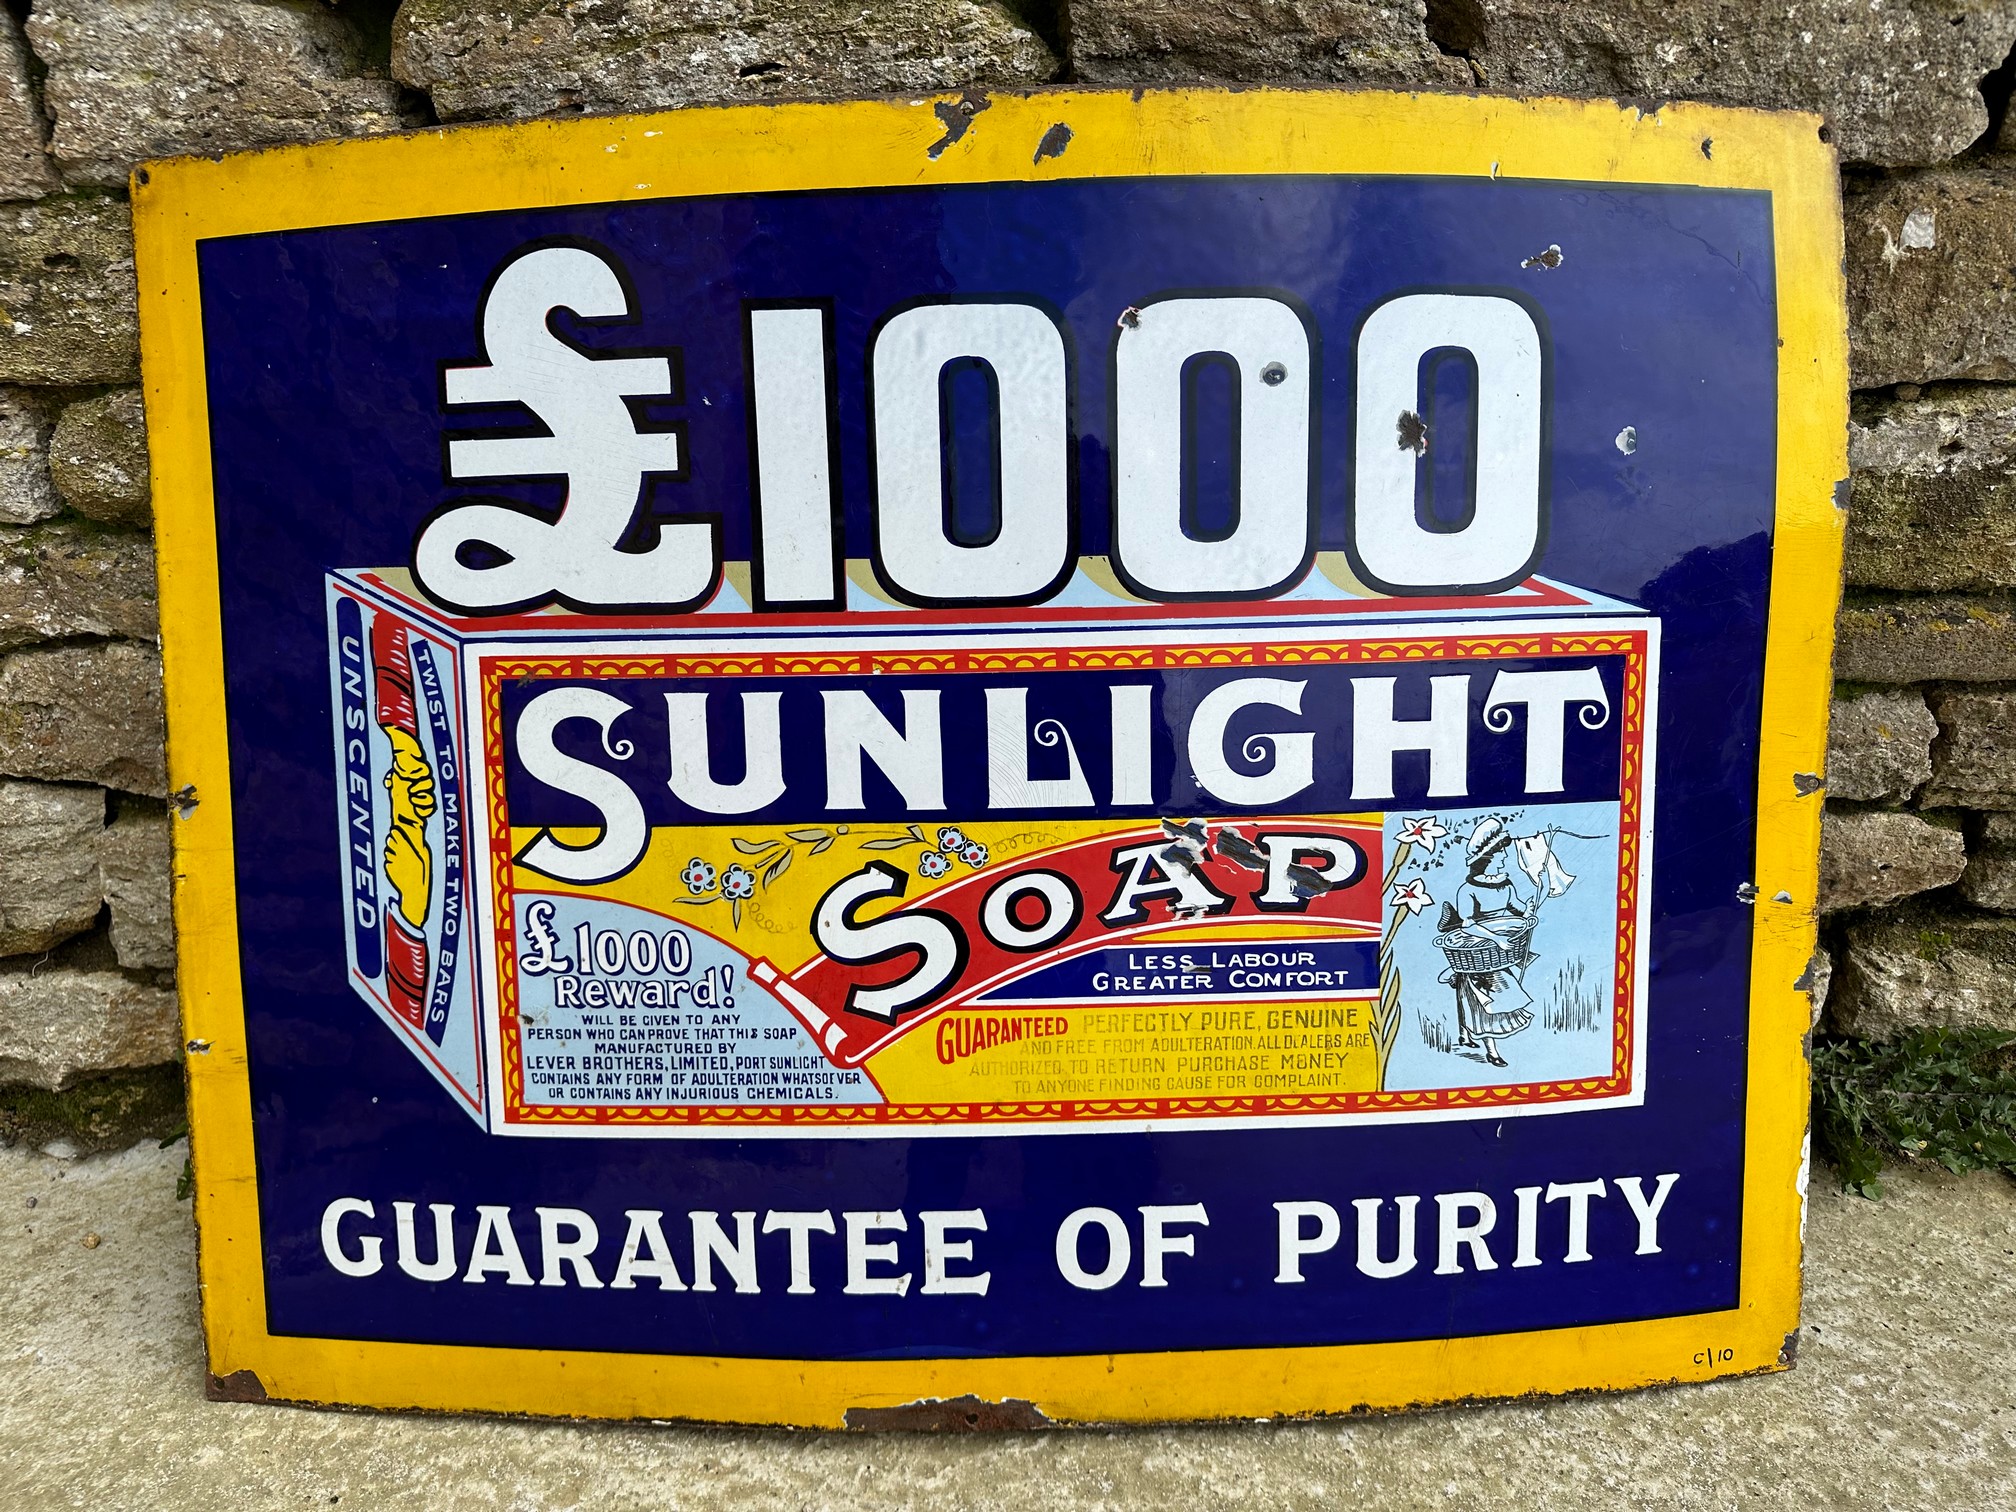 A Sunlight Soap £1,000 Guarantee of Purity pictorial enamel advertising sign, 36 x 27".